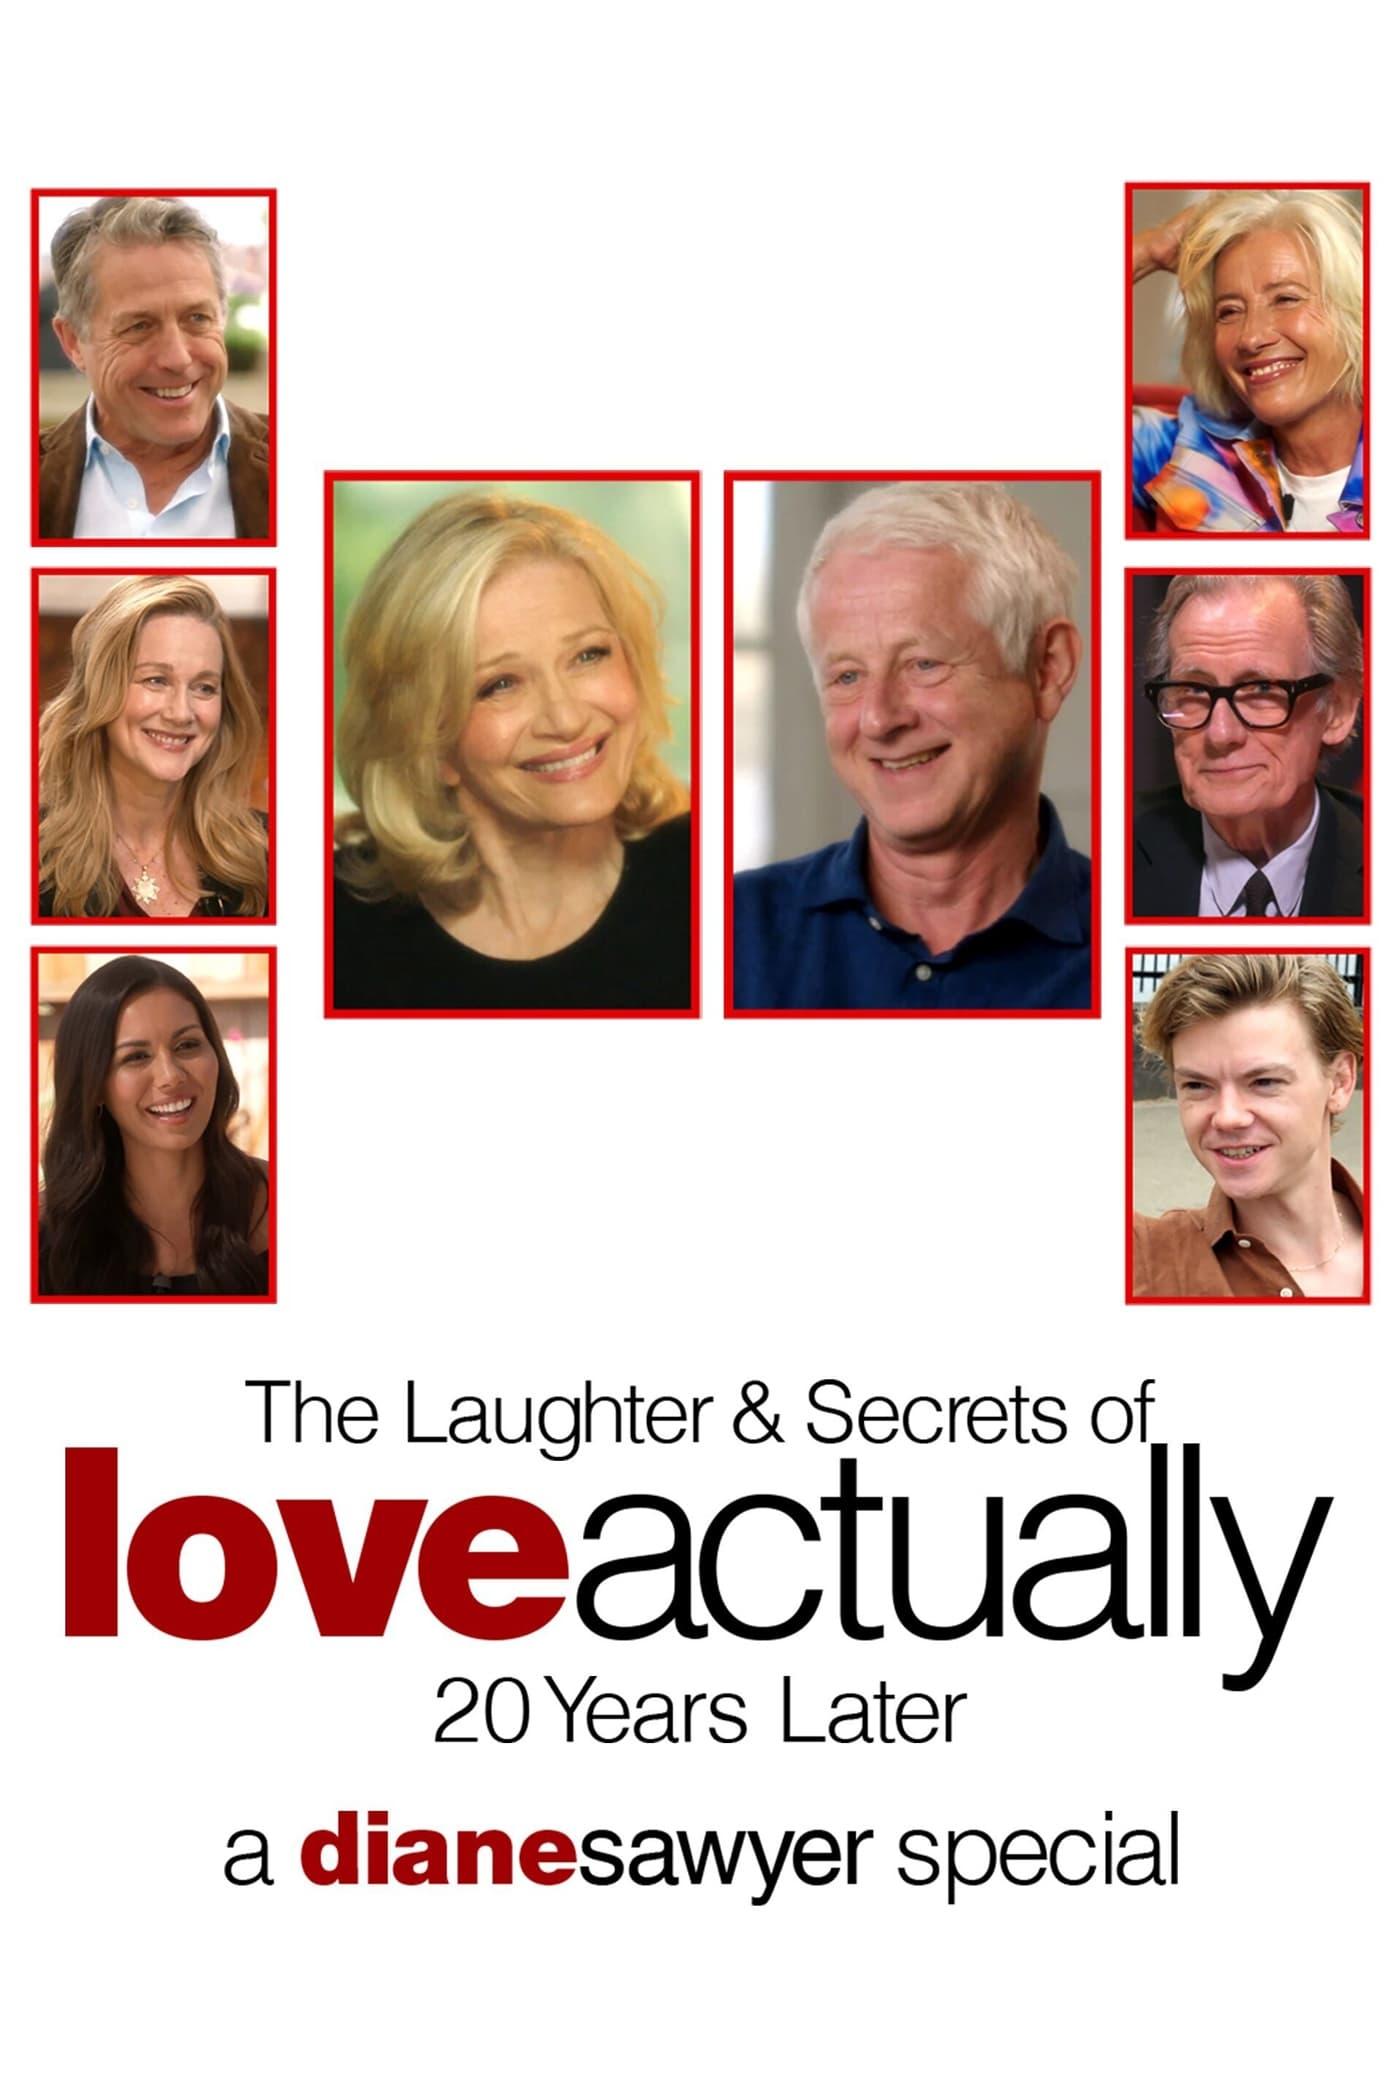 The Laughter & Secrets of 'Love Actually': 20 Years Later poster